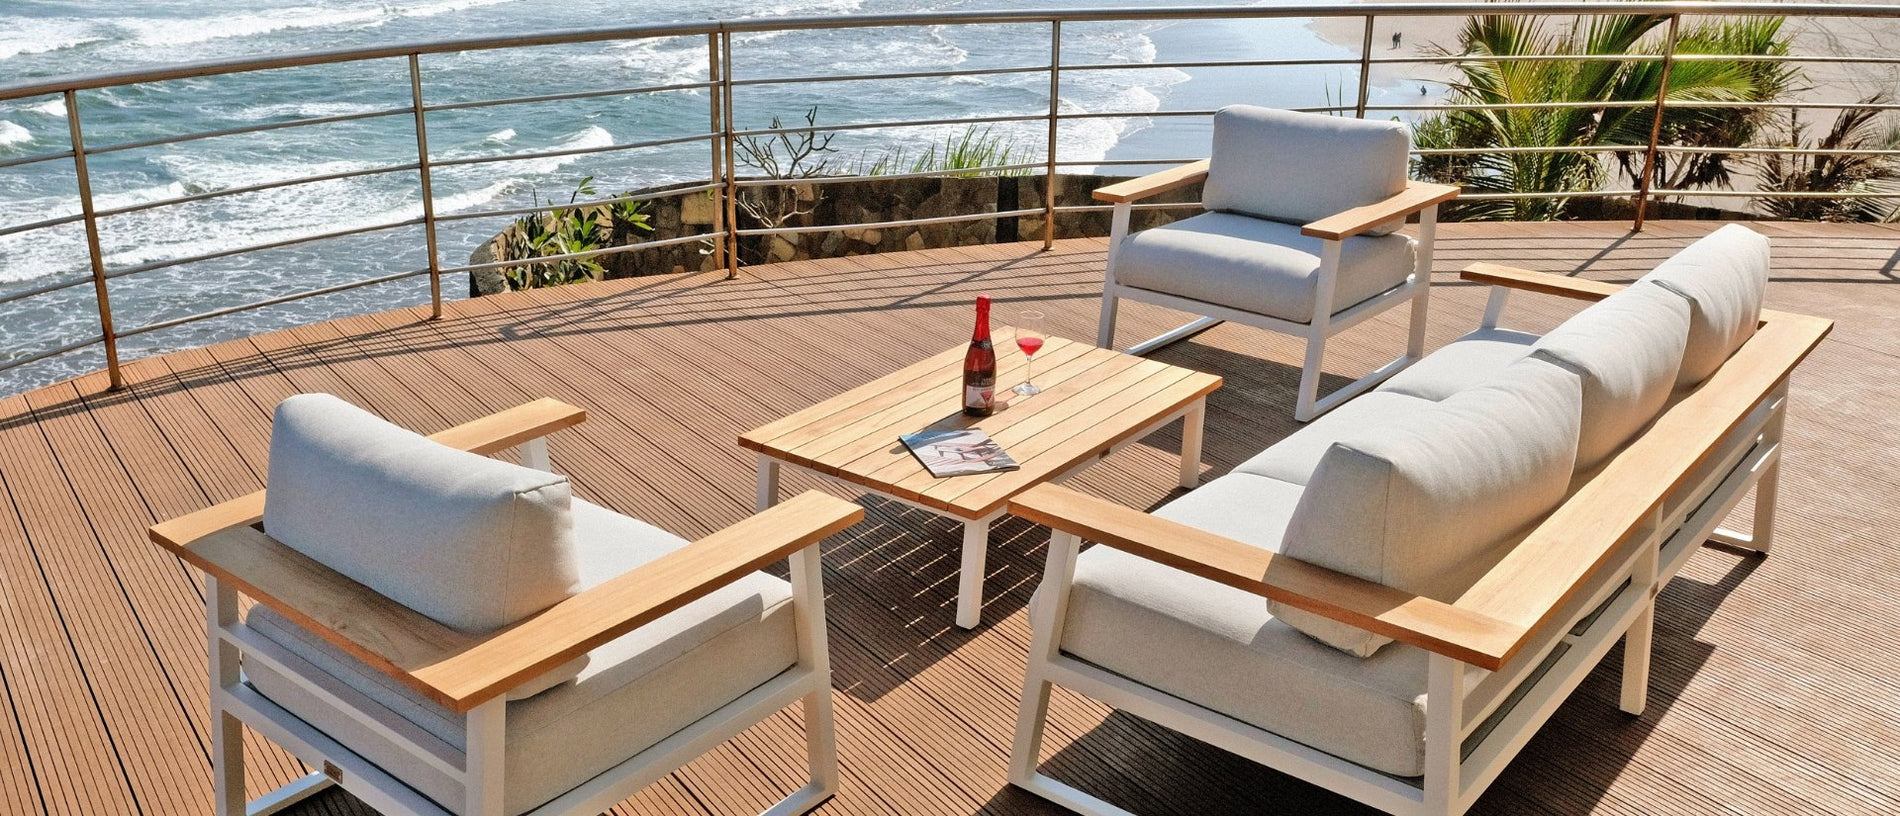 Our Collection of S2dio Outdoor Furniture is durable and stylish